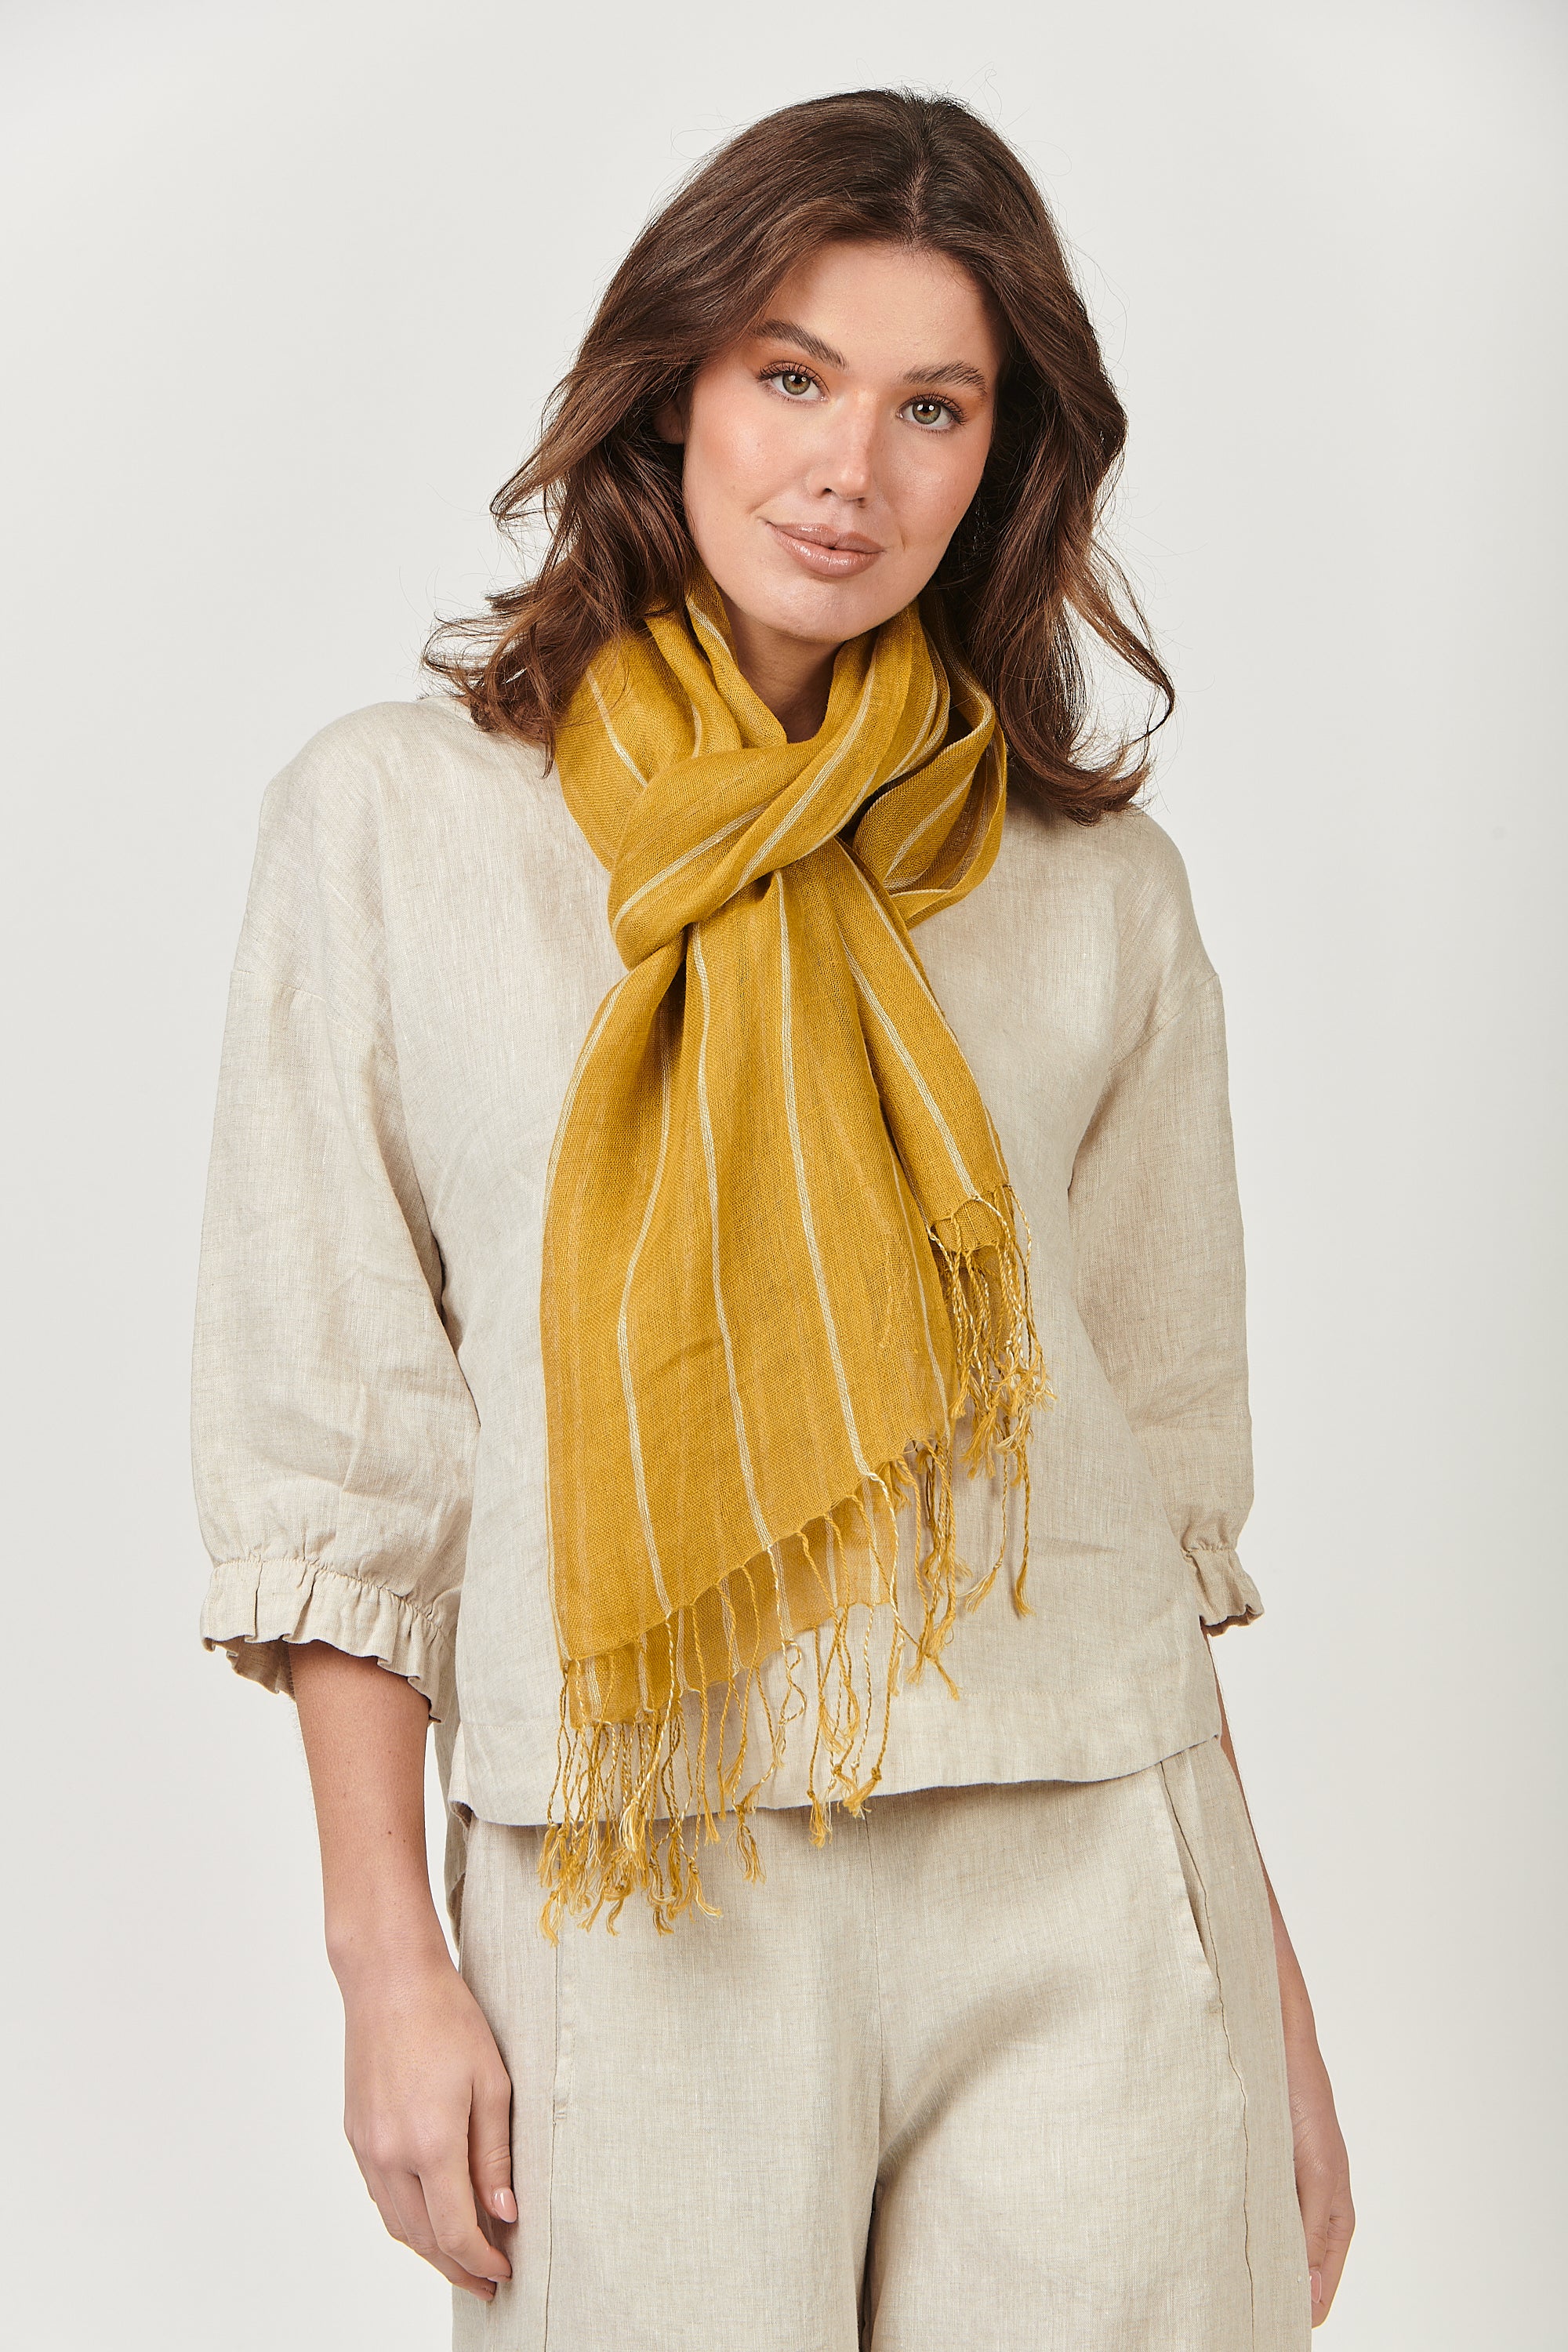 Naturals by O & J Linen Striped Scarf in Kiwi